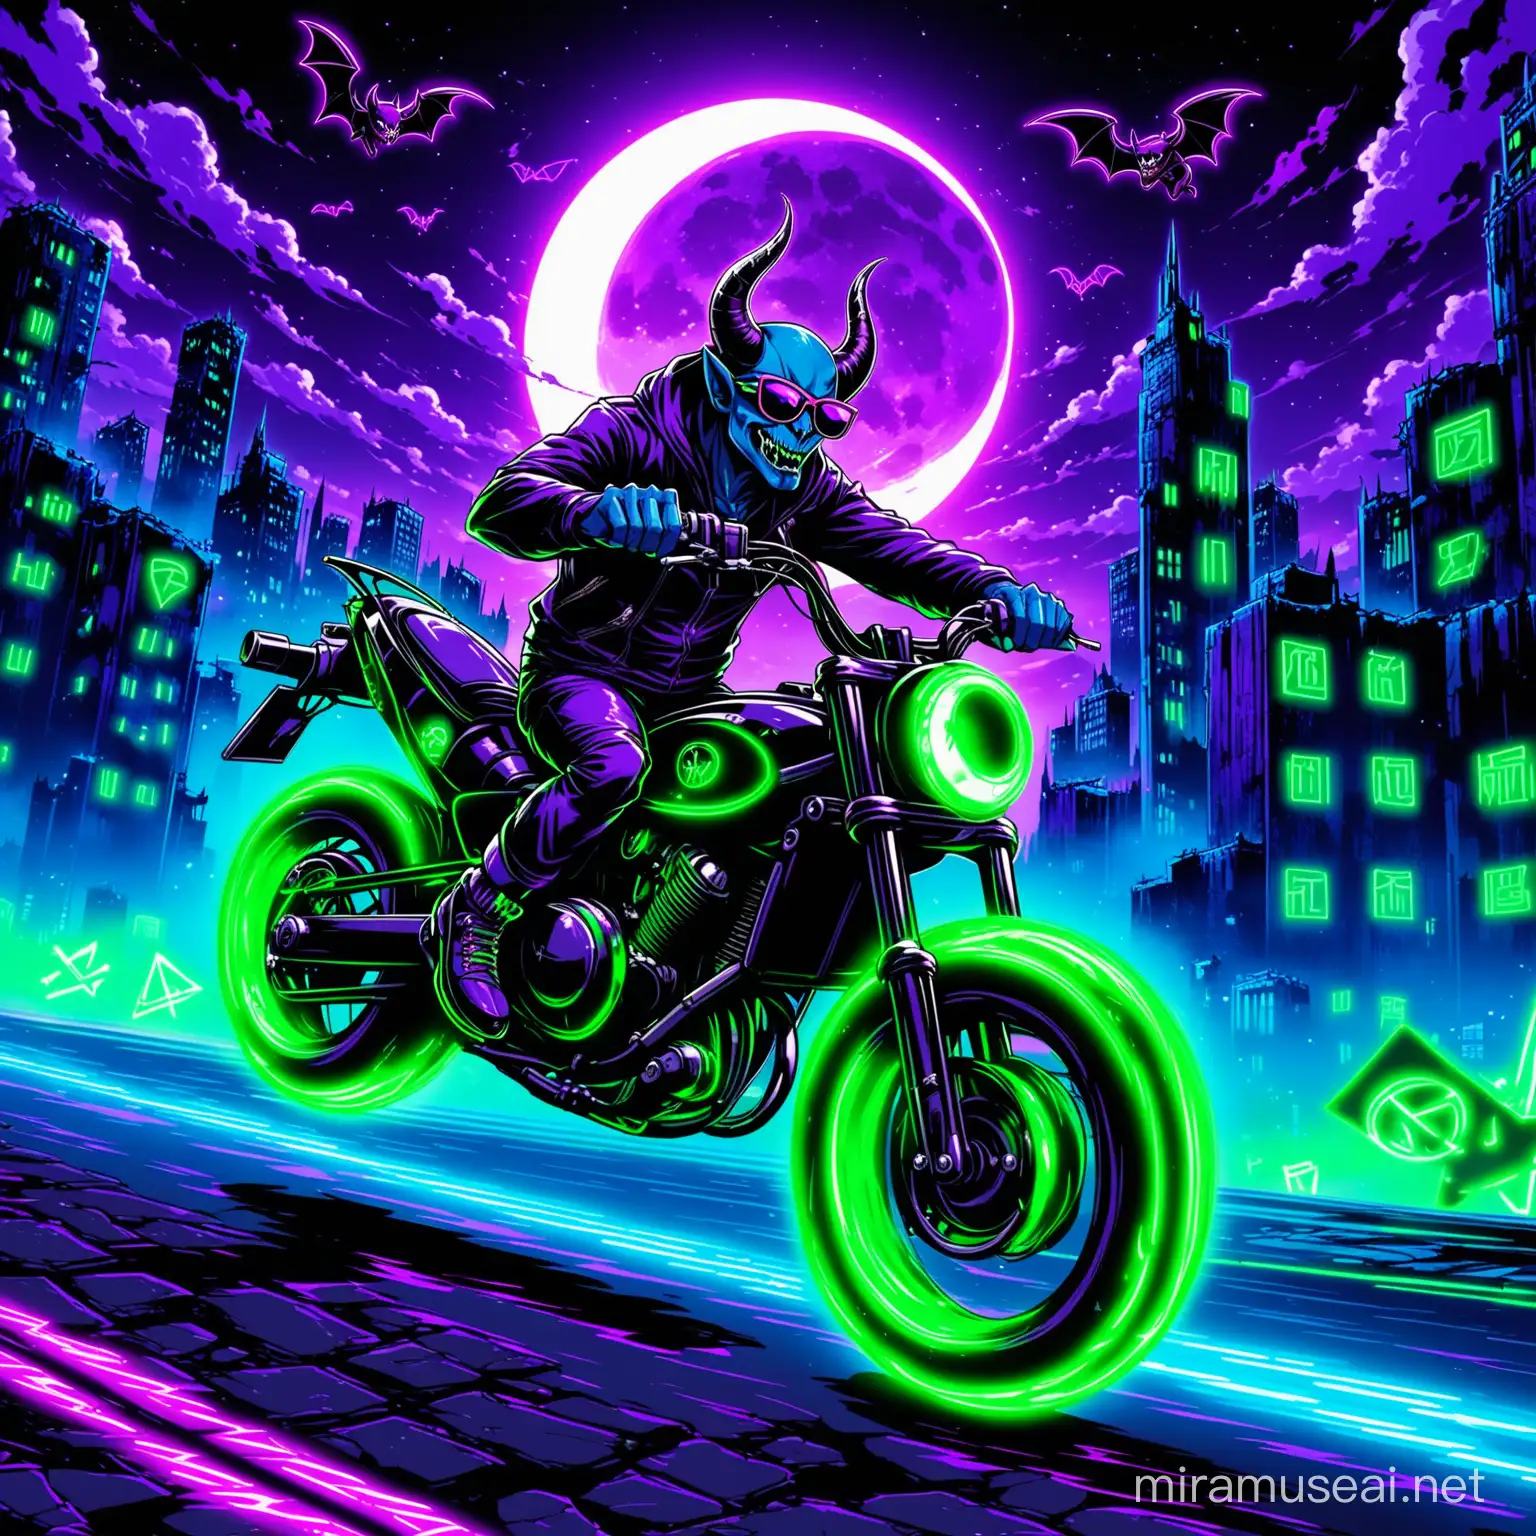 Devil Riding a motor cycle while doing a wheelie 
appreance- neon blue skin/full body/ backwards horns/sunglasses/
background-noir purple night/sky/cresent.moon/ruind city/christ-runes neon green